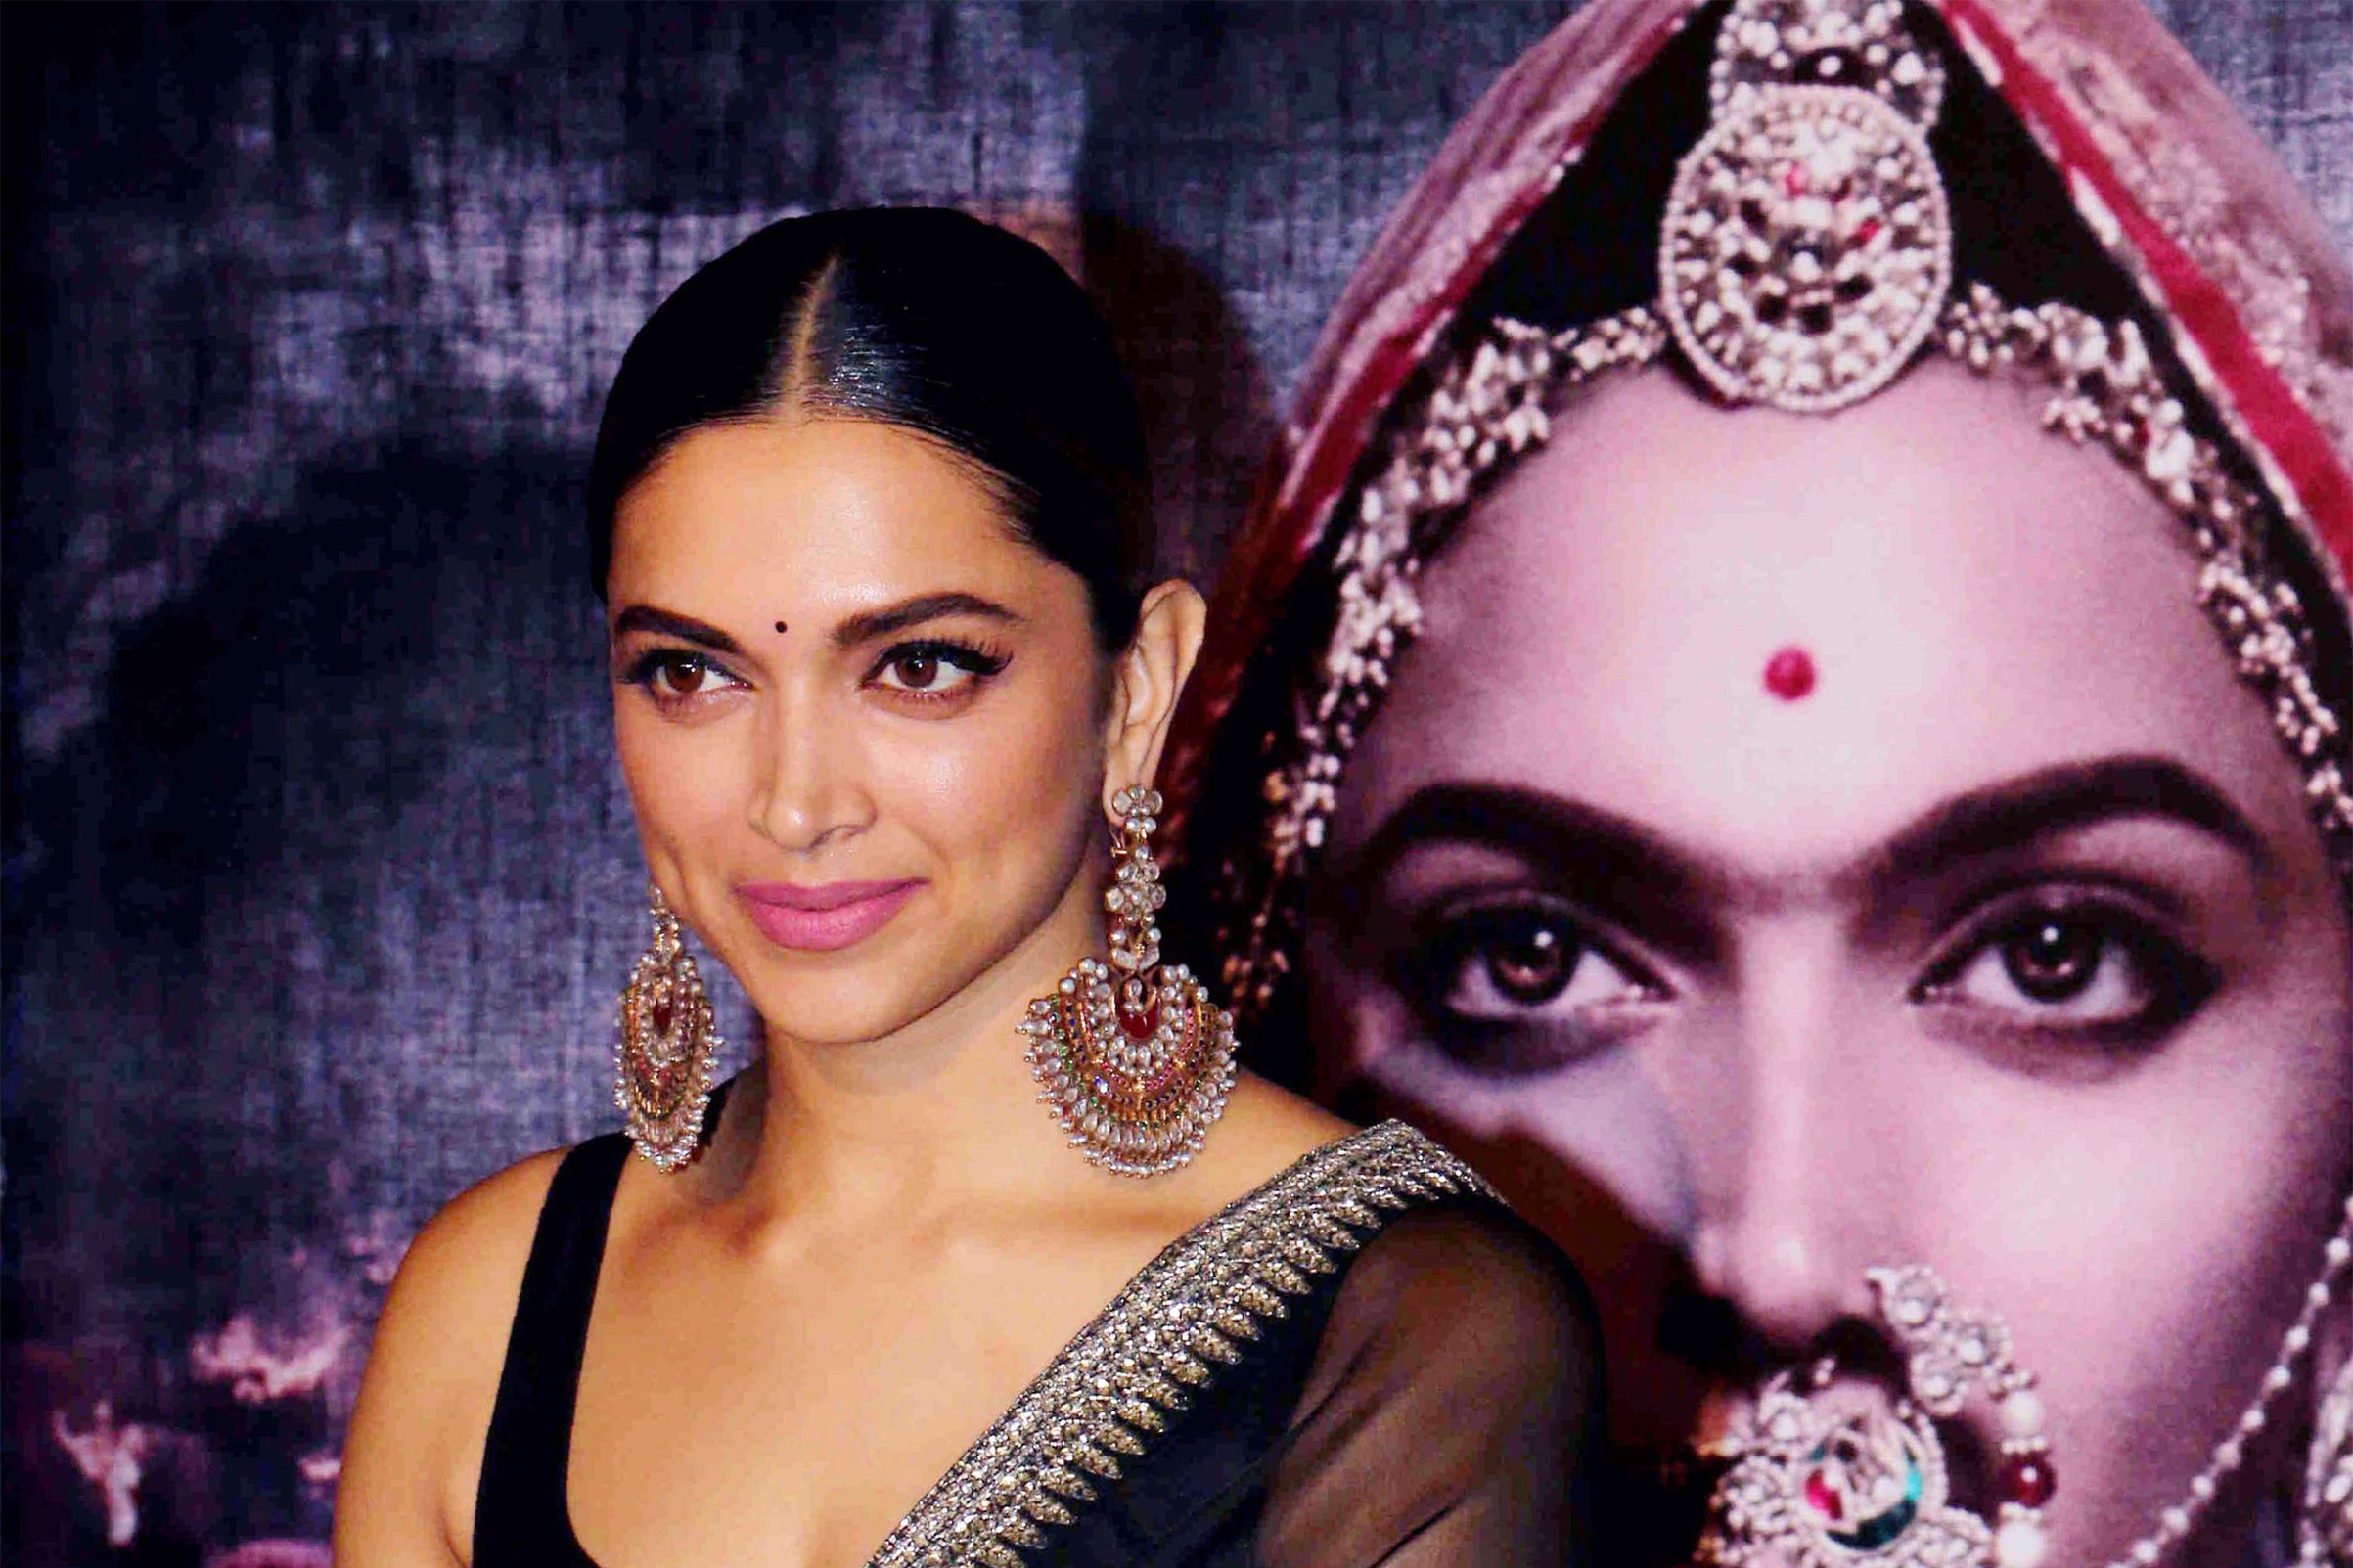 Actor Deepika Padukone was put under police protection after receiving death threats. (STR/AFP/Getty Images)